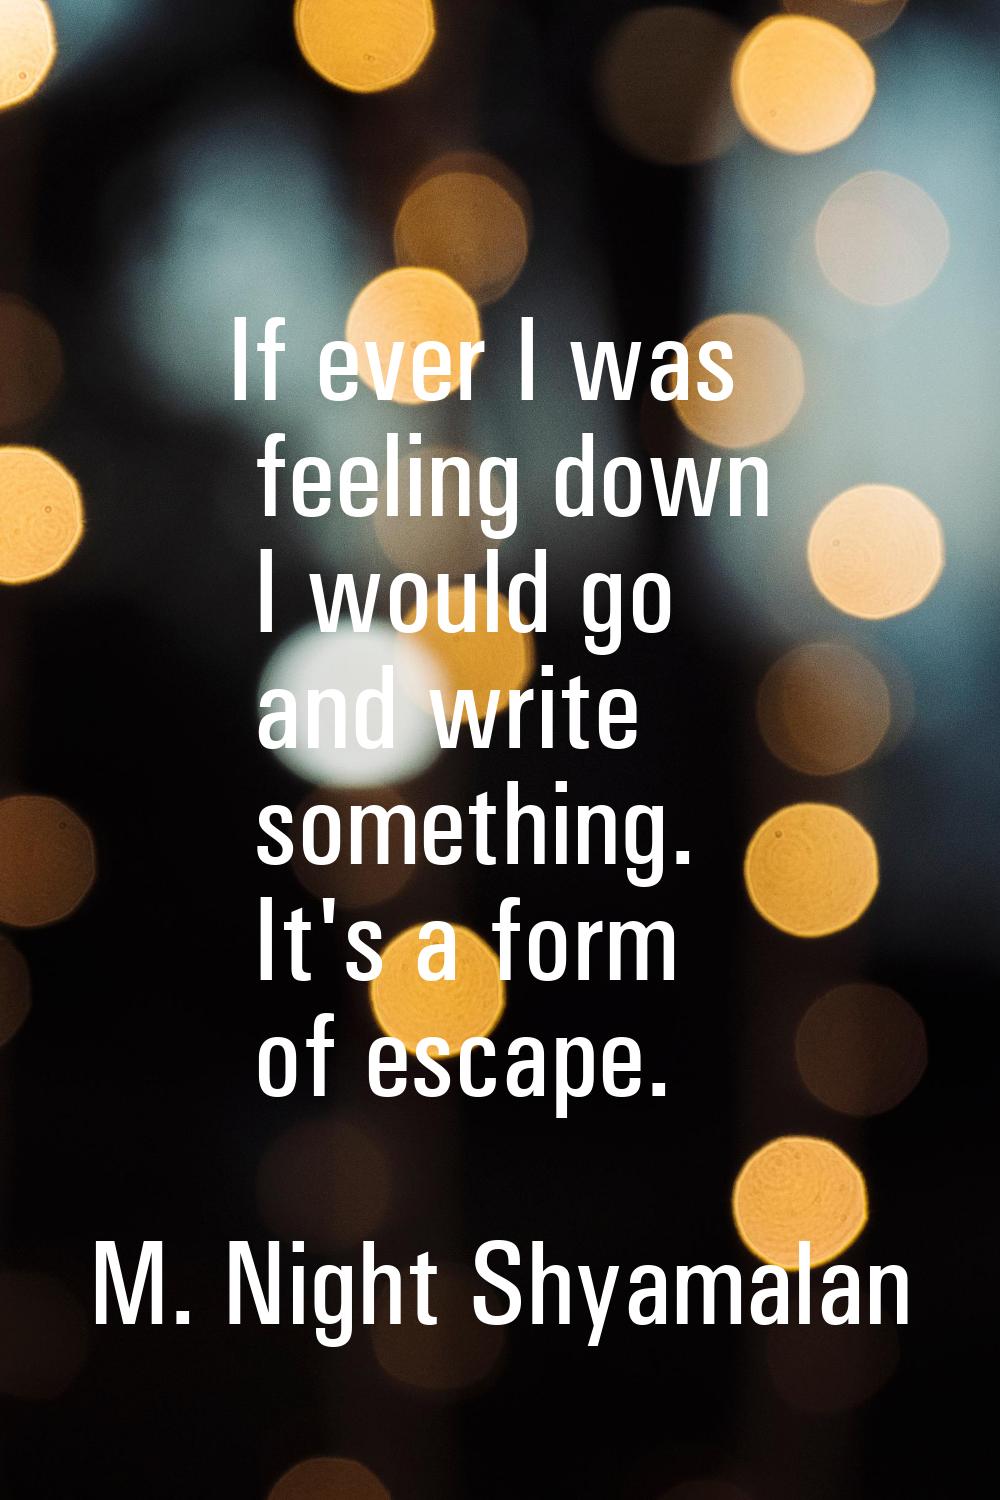 If ever I was feeling down I would go and write something. It's a form of escape.